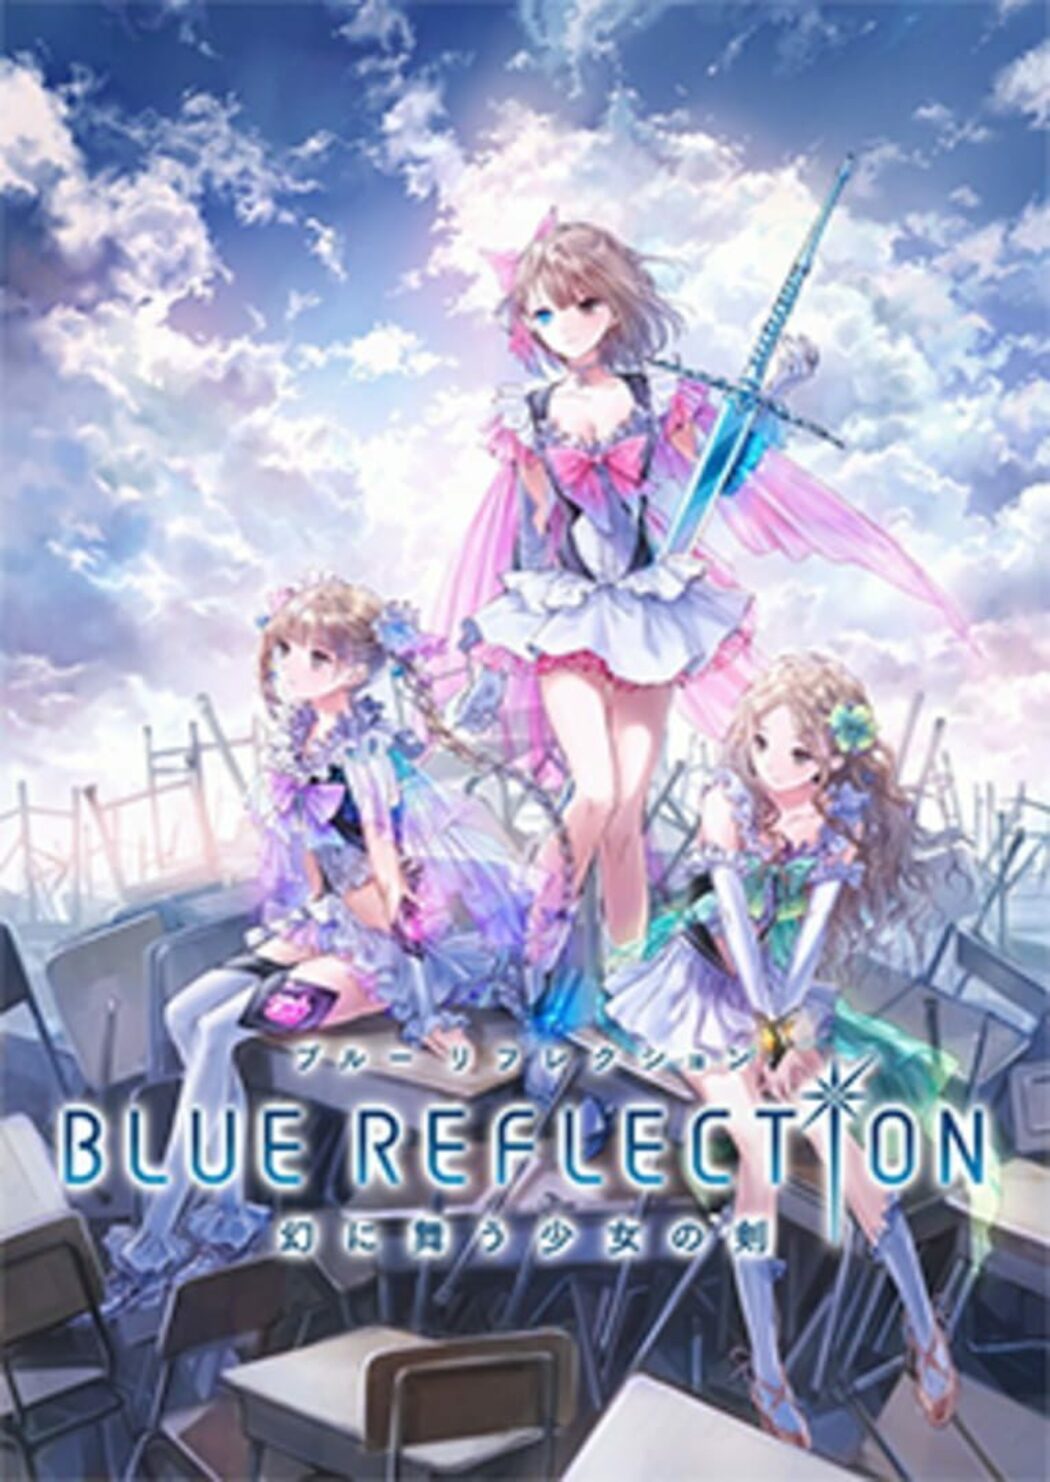 Blue Reflection Sun Release Date Set to February 21